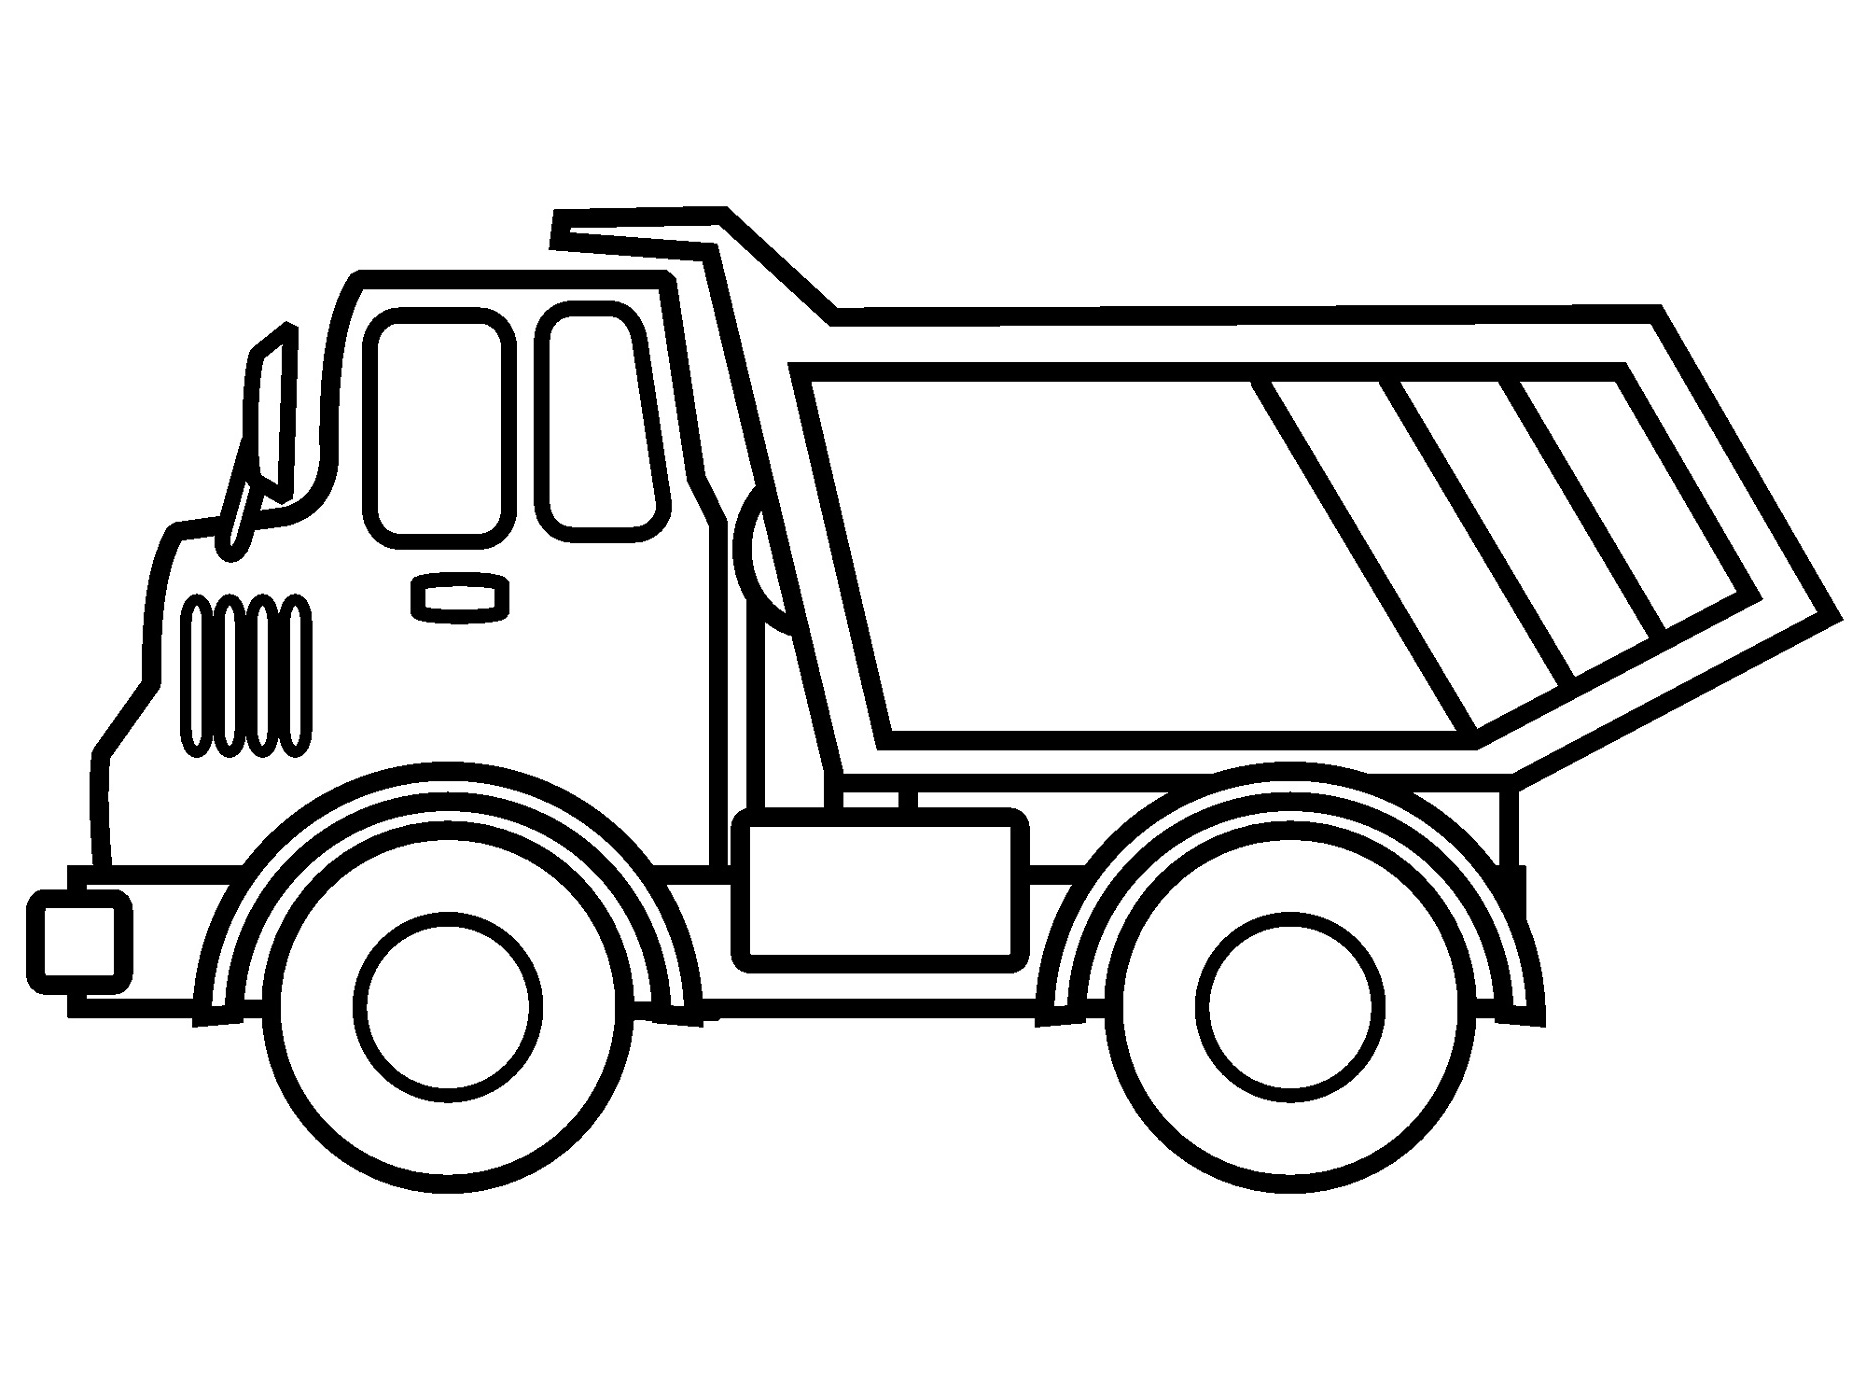 Fascinating Truck Coloring Pages for Kids | 101 Activity